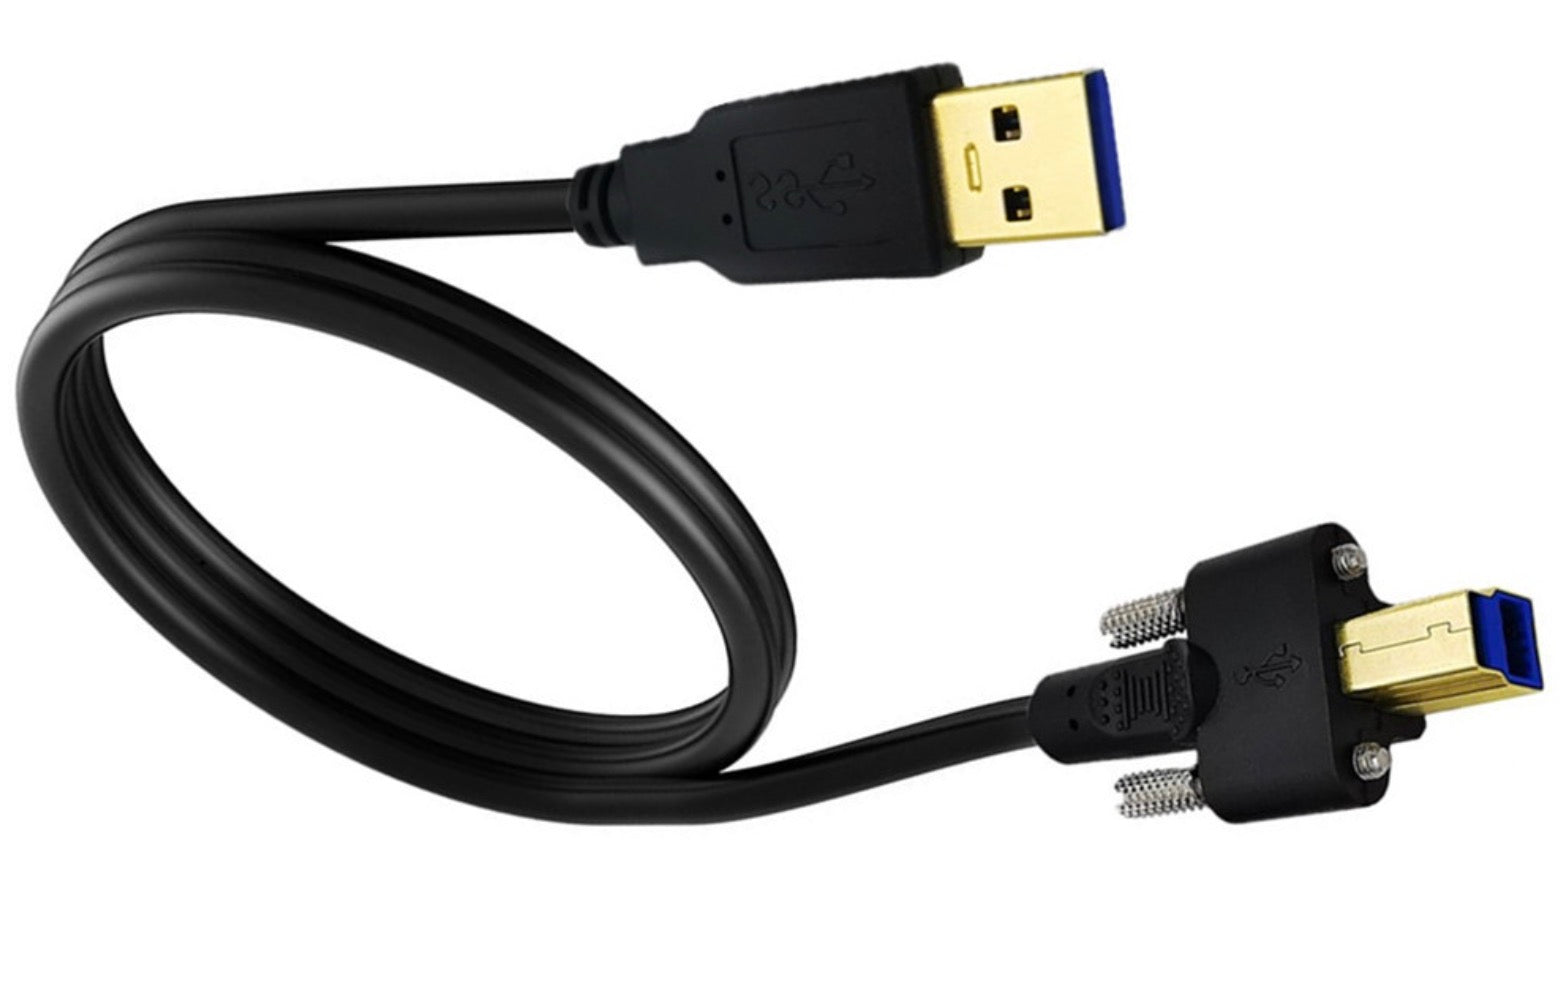 USB 3.0 A Male to Type B Male Cable (Locking Screw) For Printers and Scanners